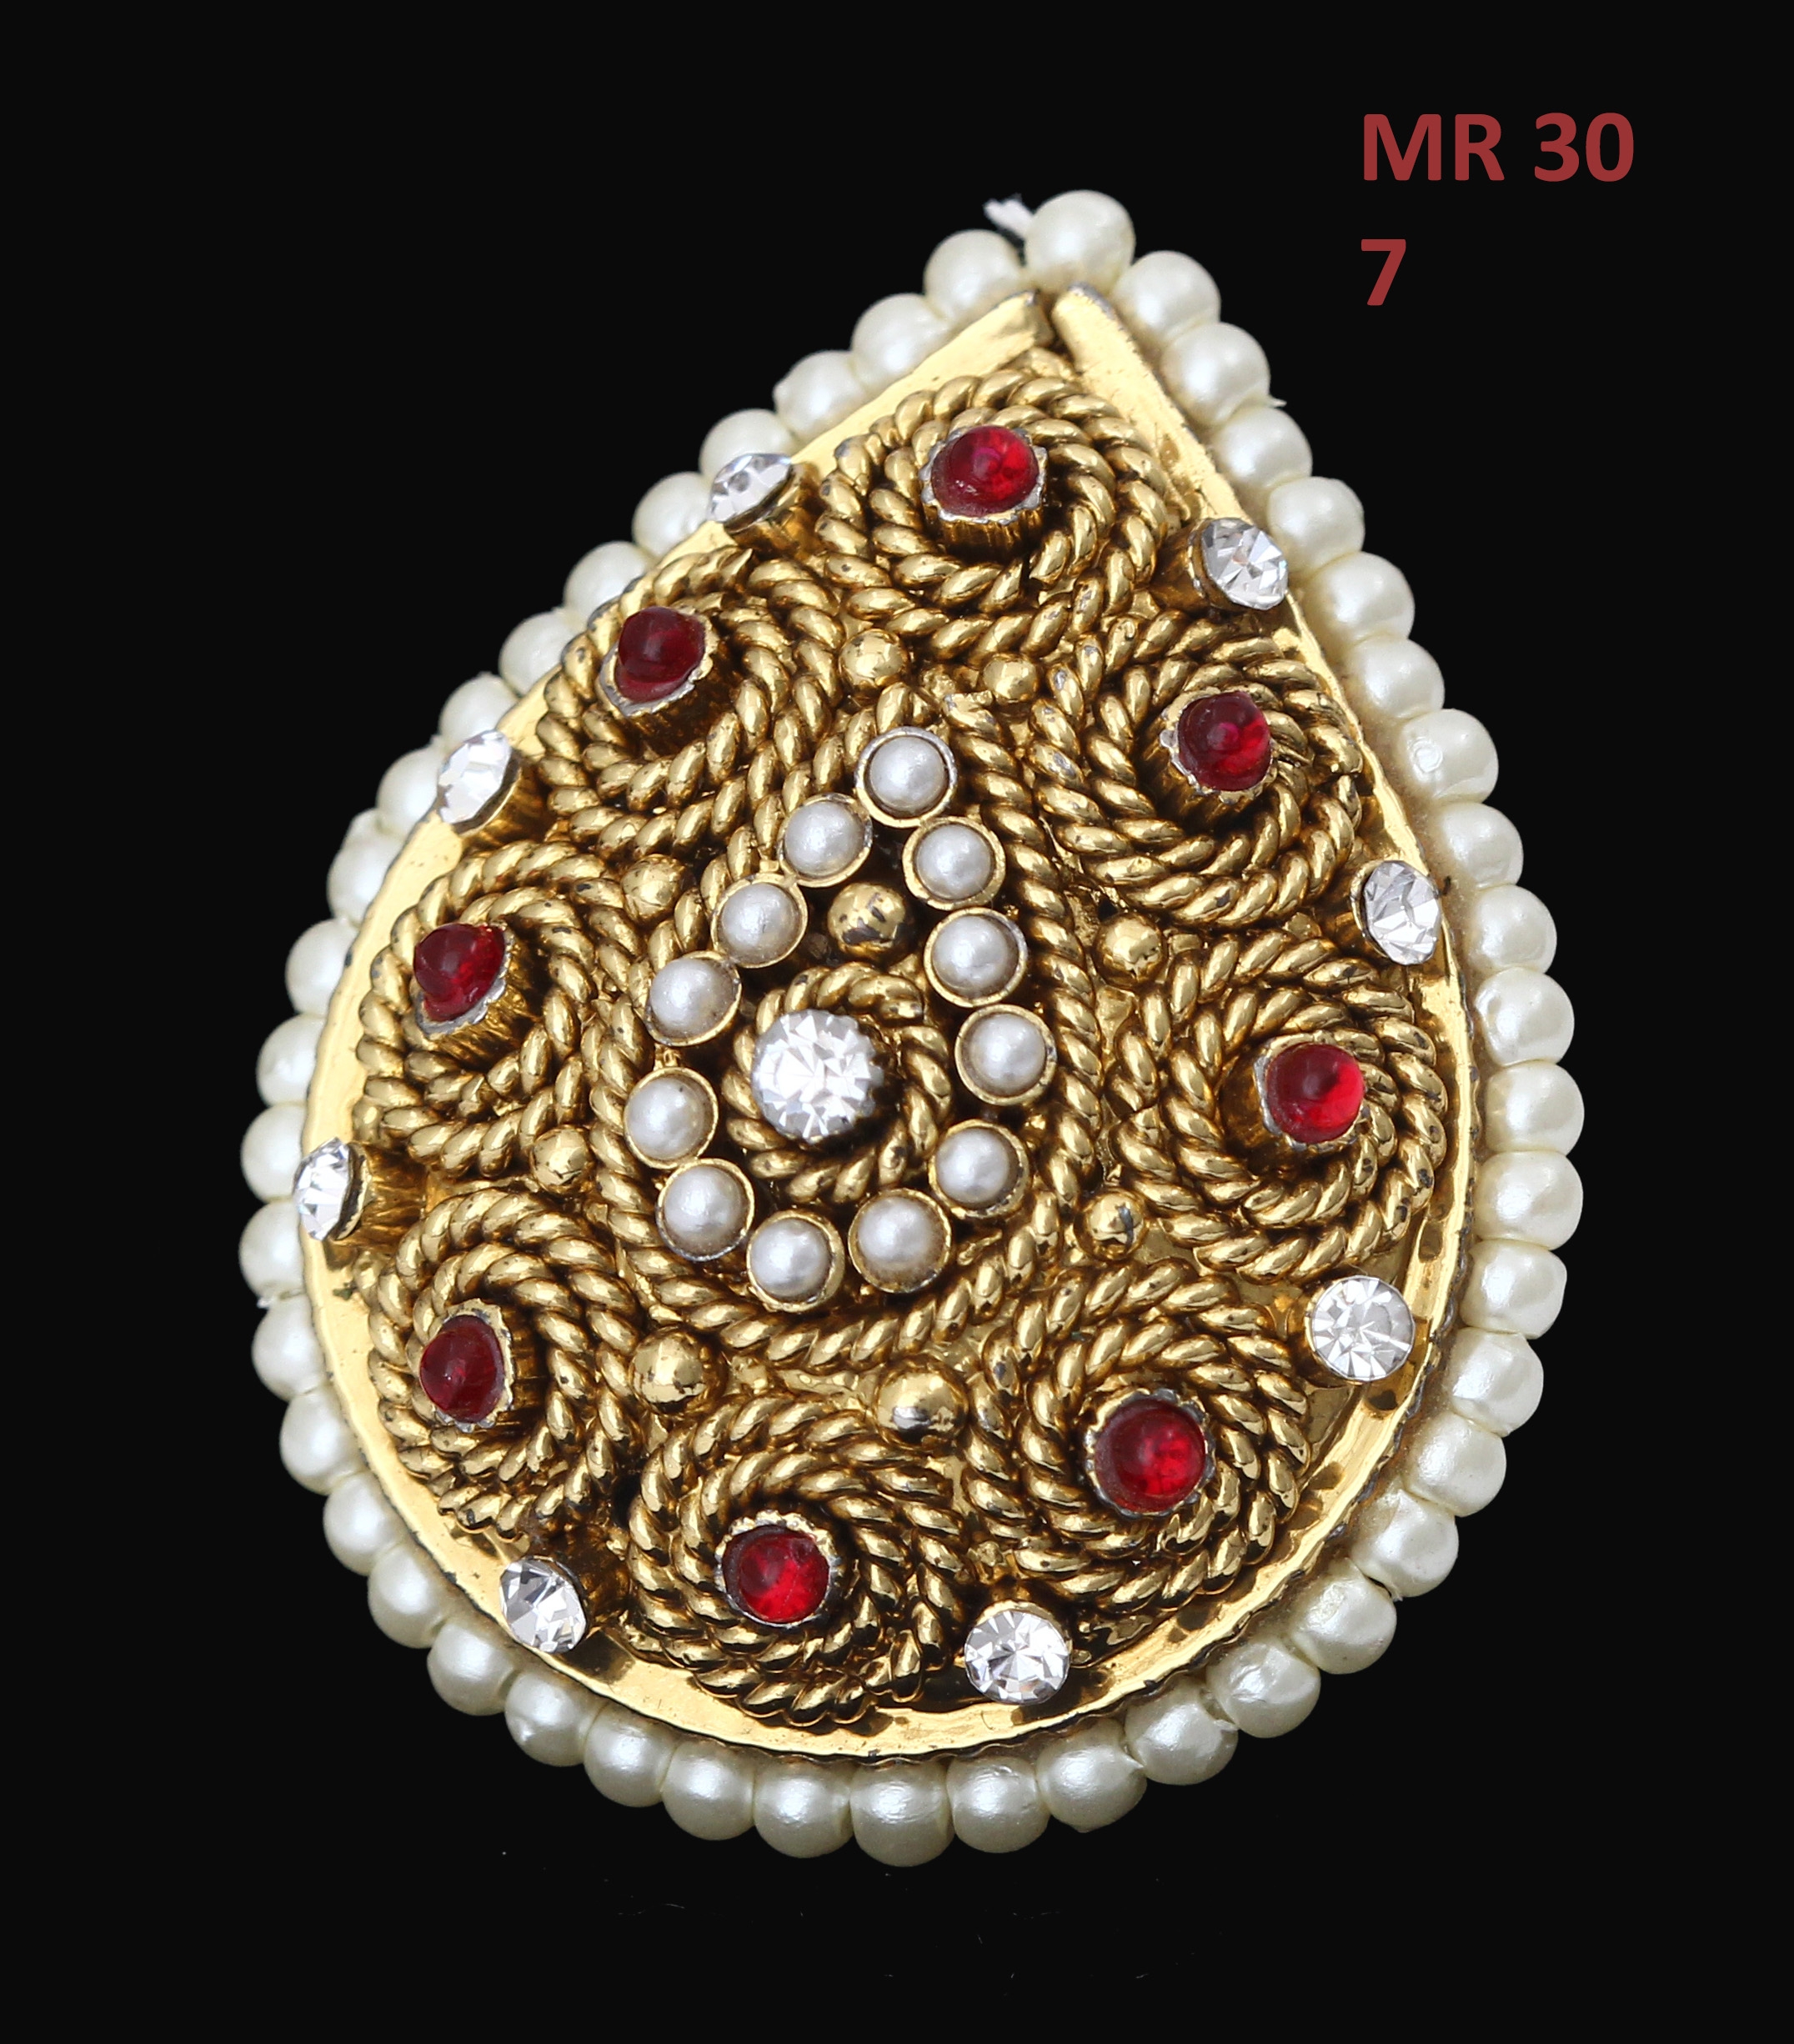 55Carat | Unique Design Polki Ring Pearl,Onyx White Red Classy 18K Gold Plated Stylish Jewellery For Women Girls Ladies